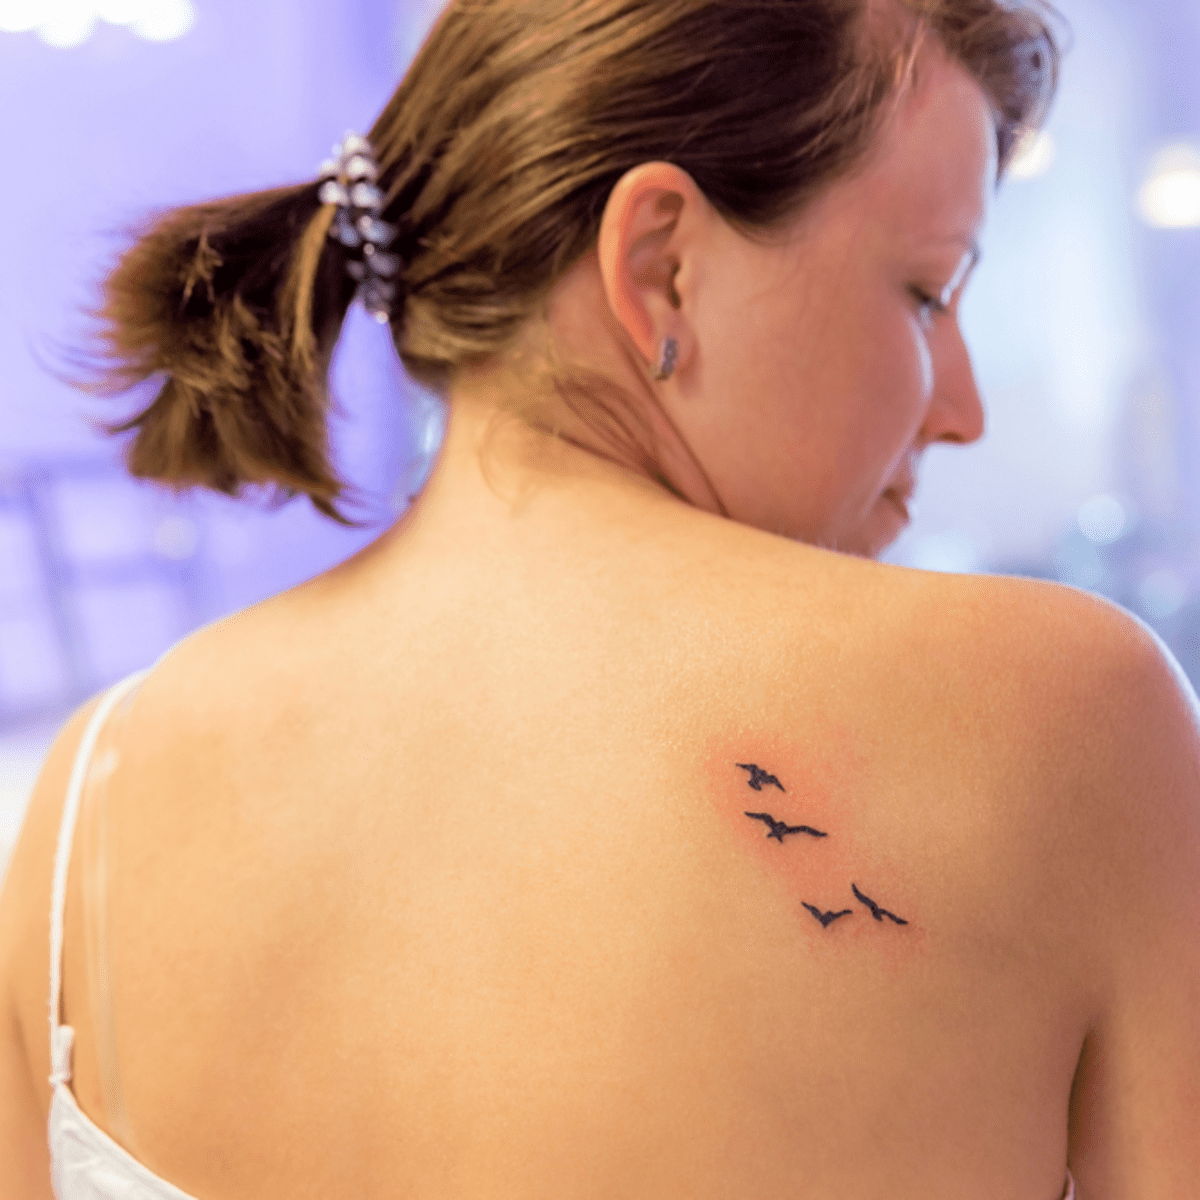 How to Take Care of Your New Tattoo - HubPages